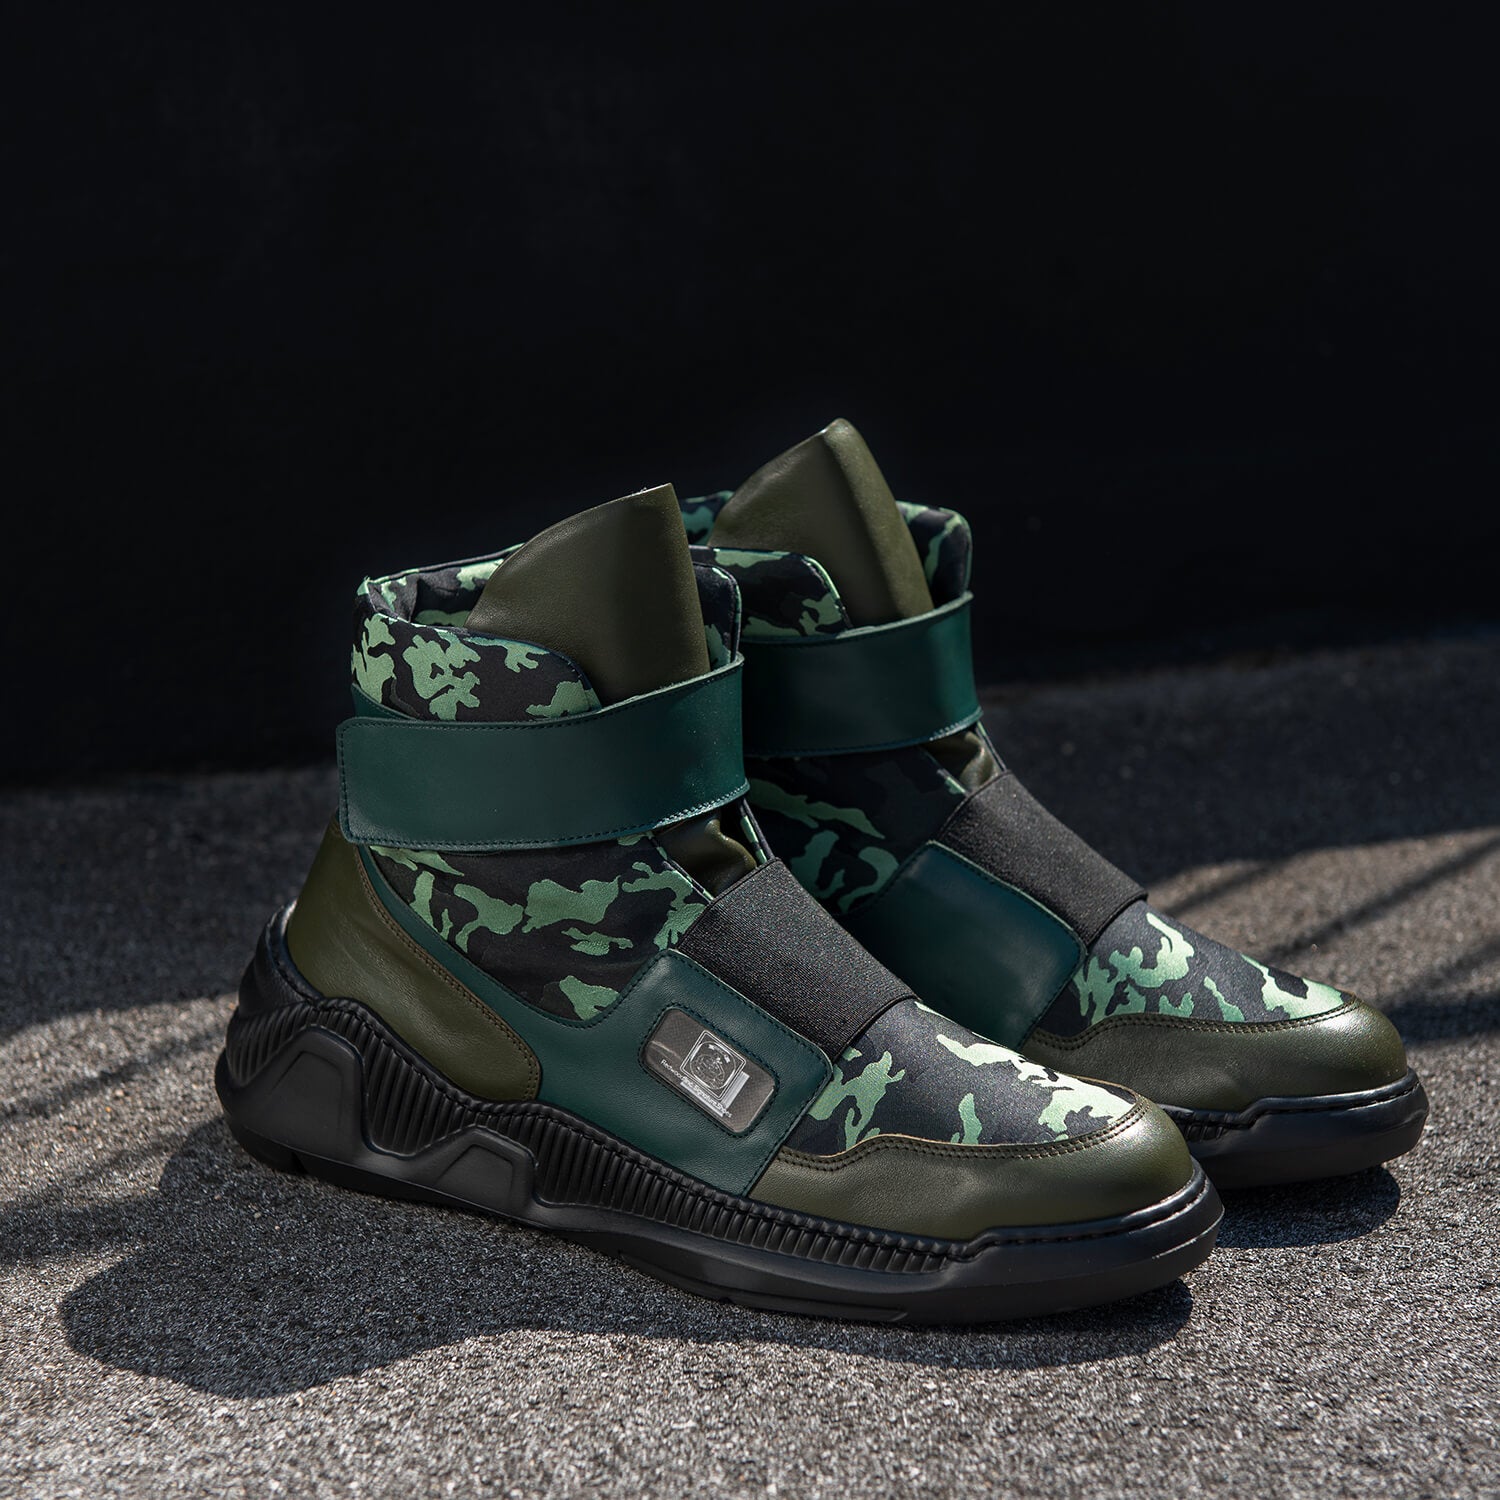 Timberland Work Boots  Monumental Auctions - Derby Pick Up - CS - HIGH  QUALITY SHEETS, LOUIS VUITTON, METAL DECOR, CORNHUSKERS, GREEN BAY PACKERS,  FURREAL, XBOX, LEGO, DOLLS, NIKE, TOMMY HILFIGER, AMERICANA